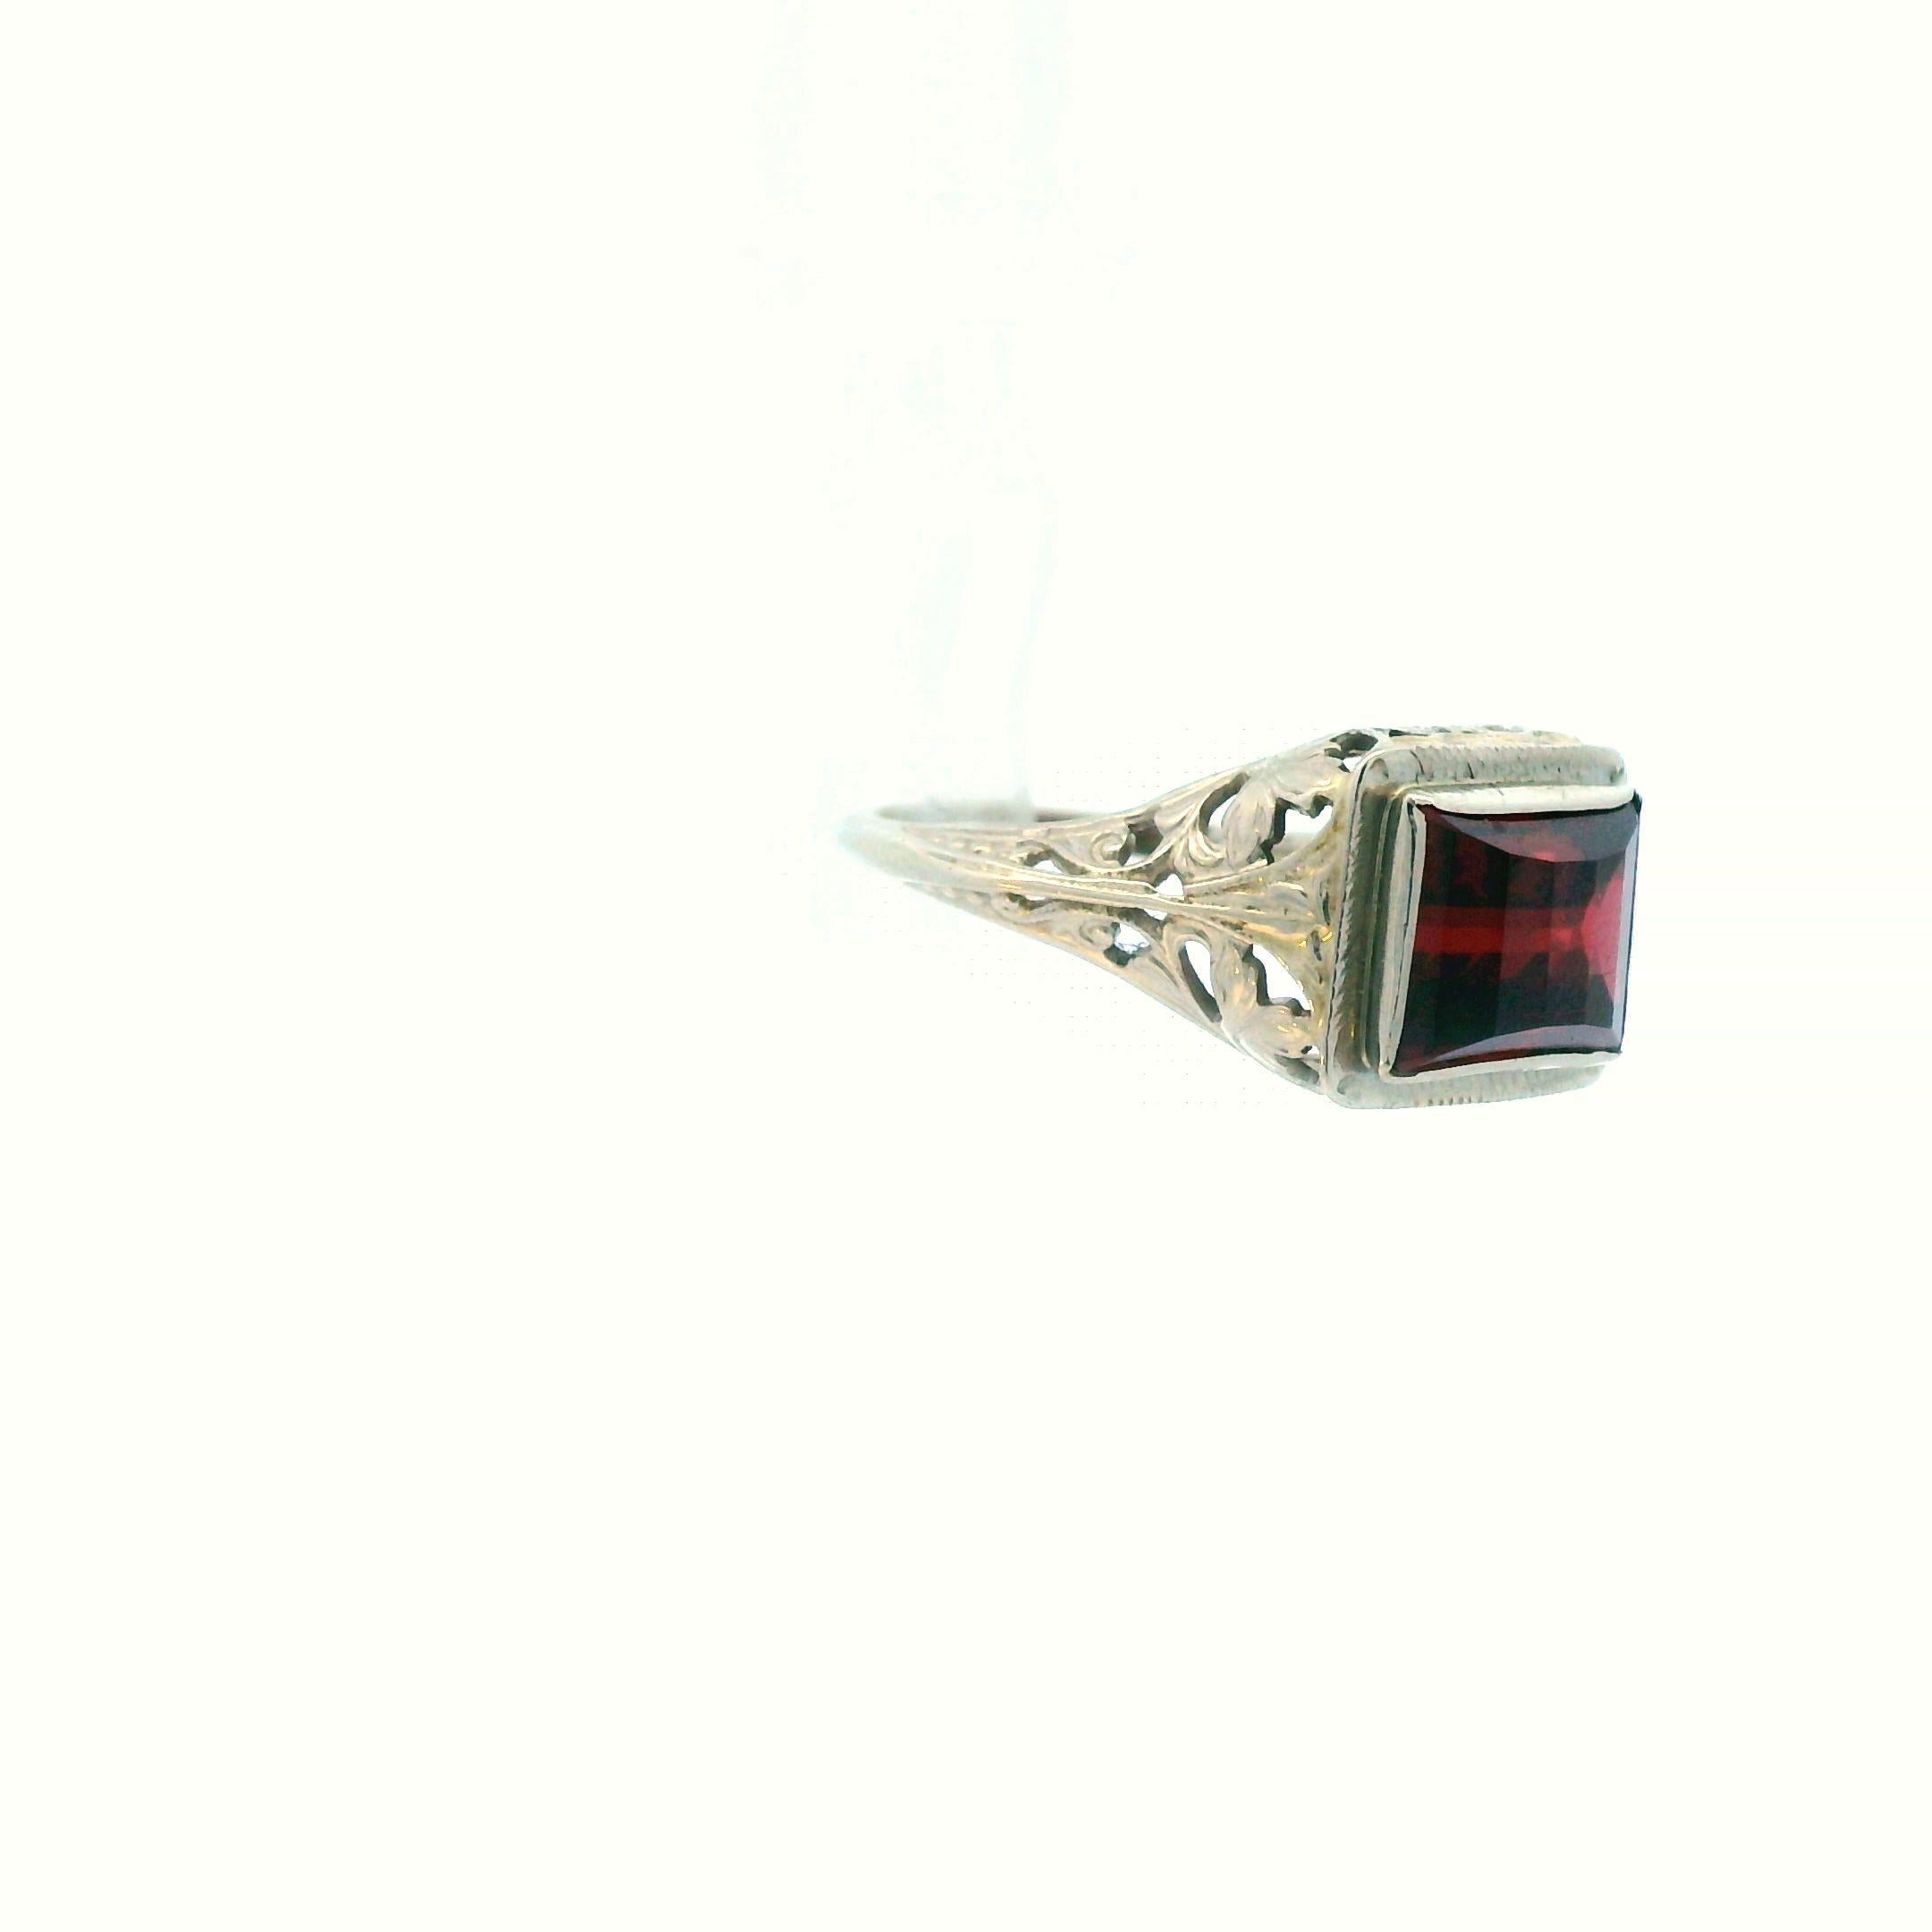 This lovely ring from the 1920s is a 14k white gold filigree garnet ring. Garnet has long been associated with giving its wearer power as well as shield the wearer from hard, making this ring the perfect sentimental gift for a special friend or